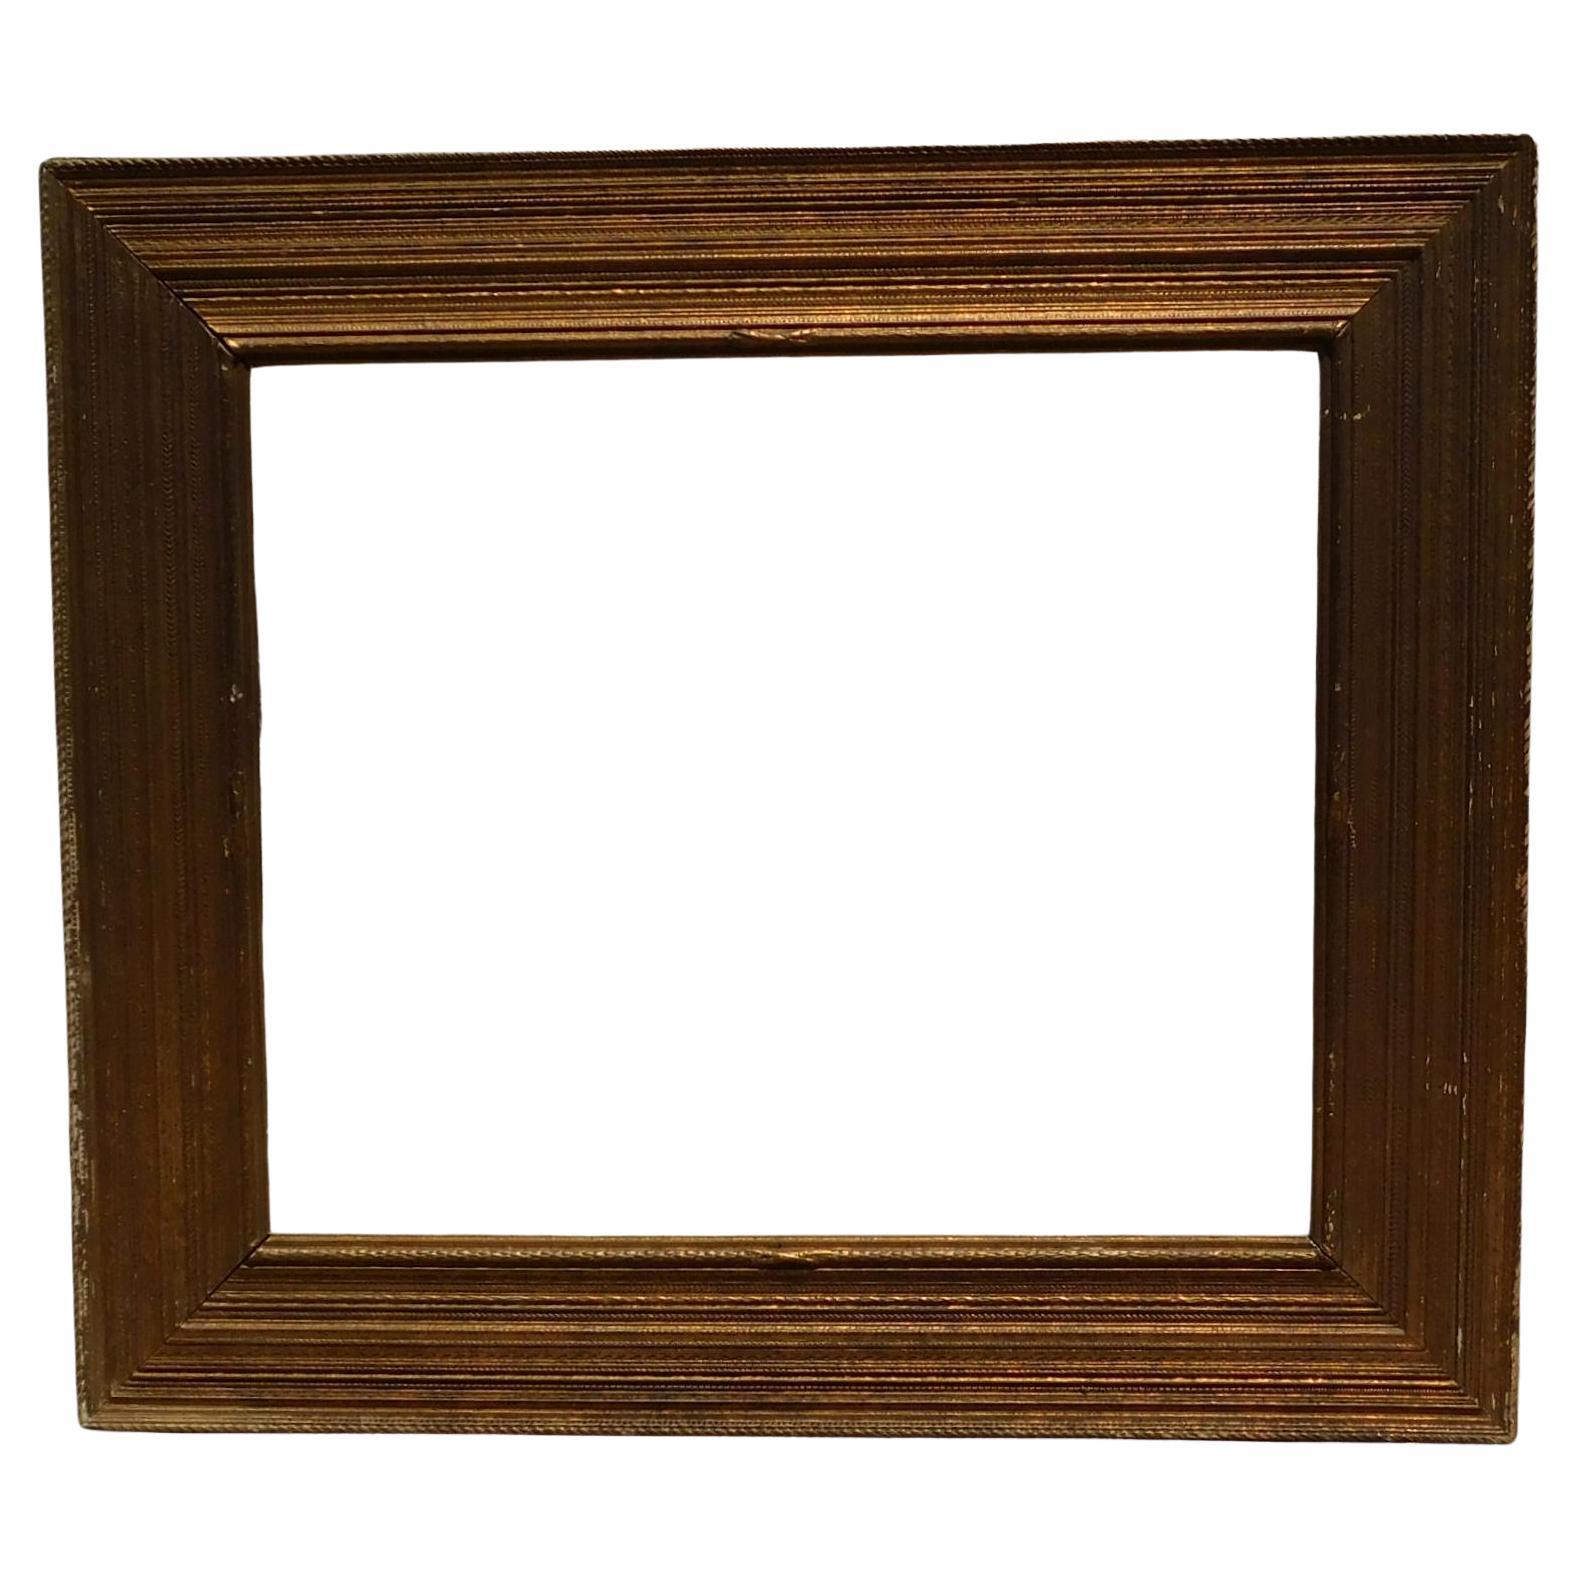 Large Newcomb Macklin American Painting Frame Stanford White Design, 1915 - 1920